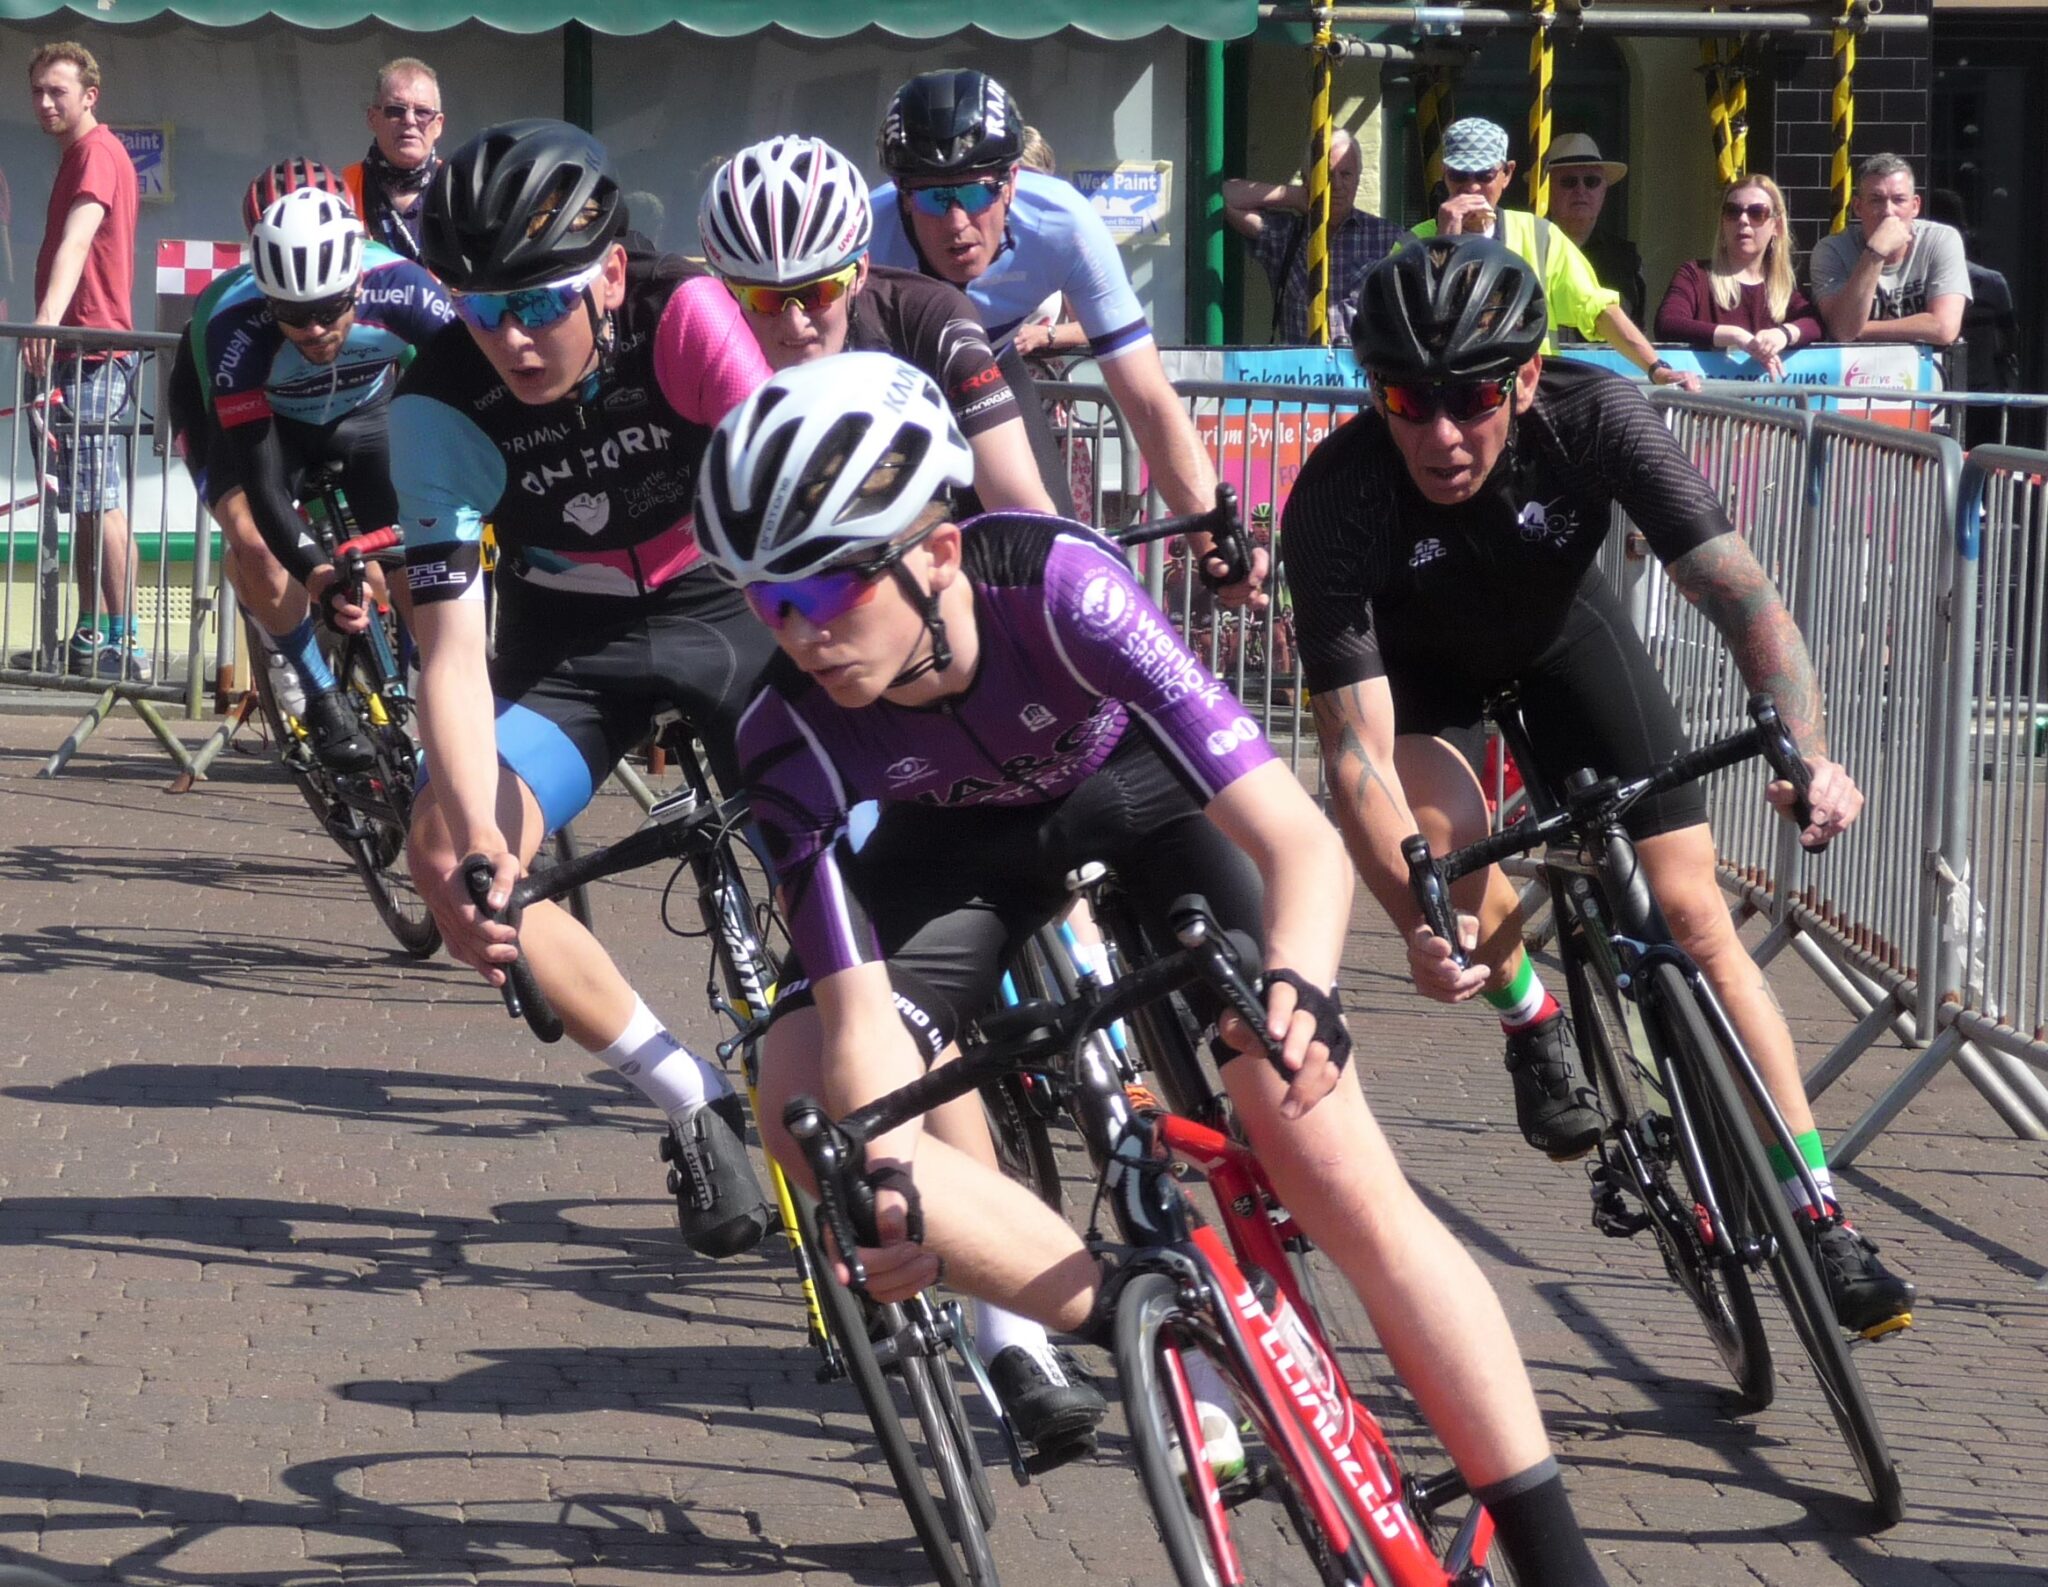 Student participating in cycling race